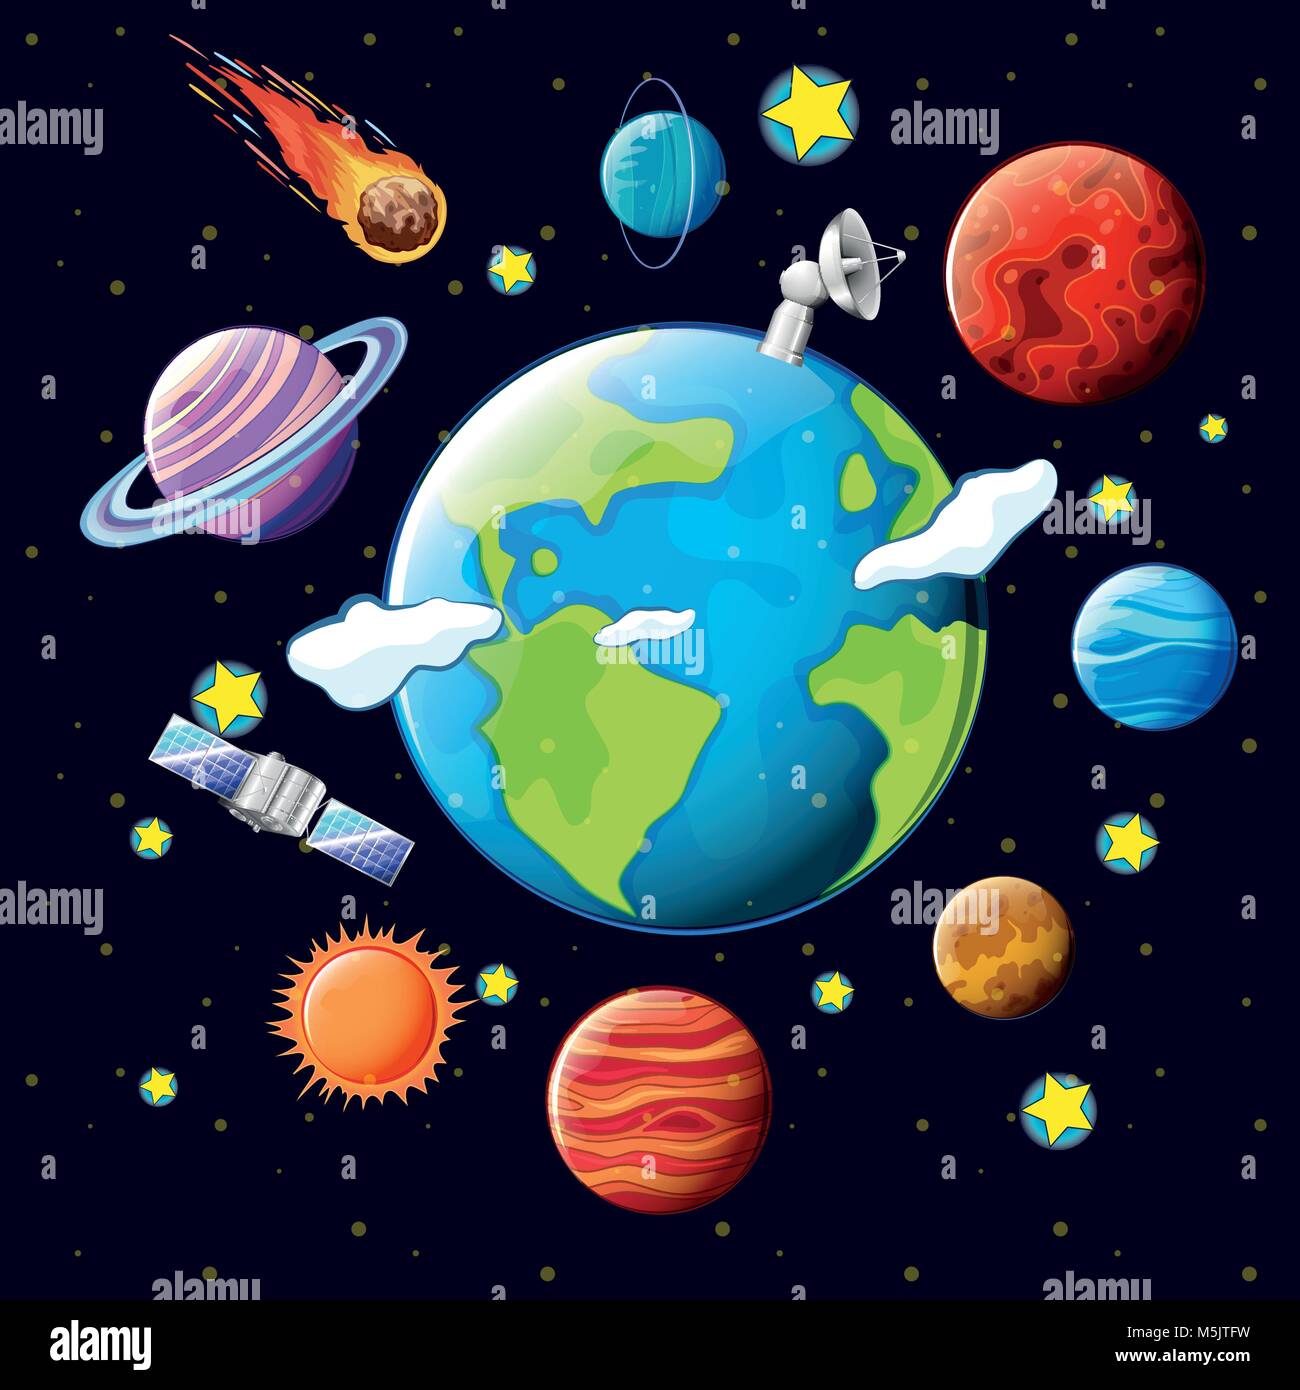 Planets and satellites around the earth illustration Stock Vector